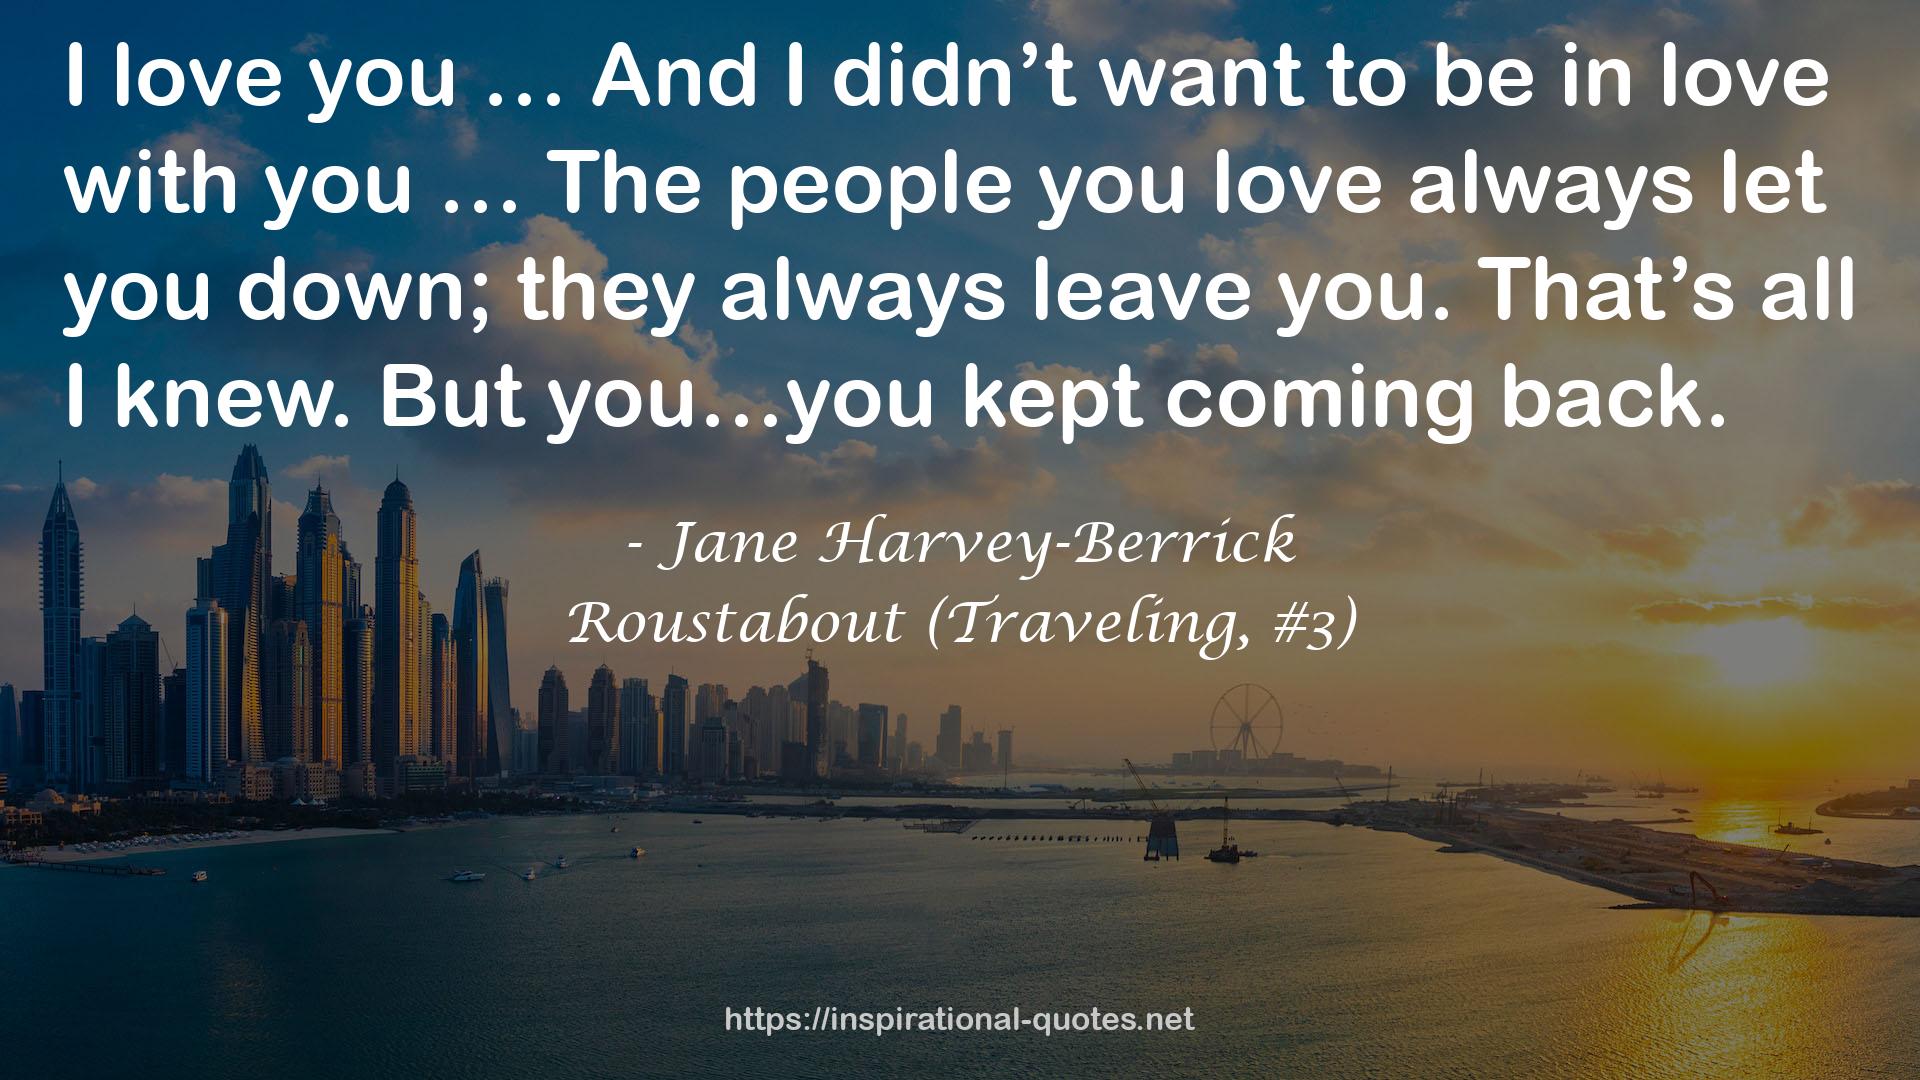 Roustabout (Traveling, #3) QUOTES